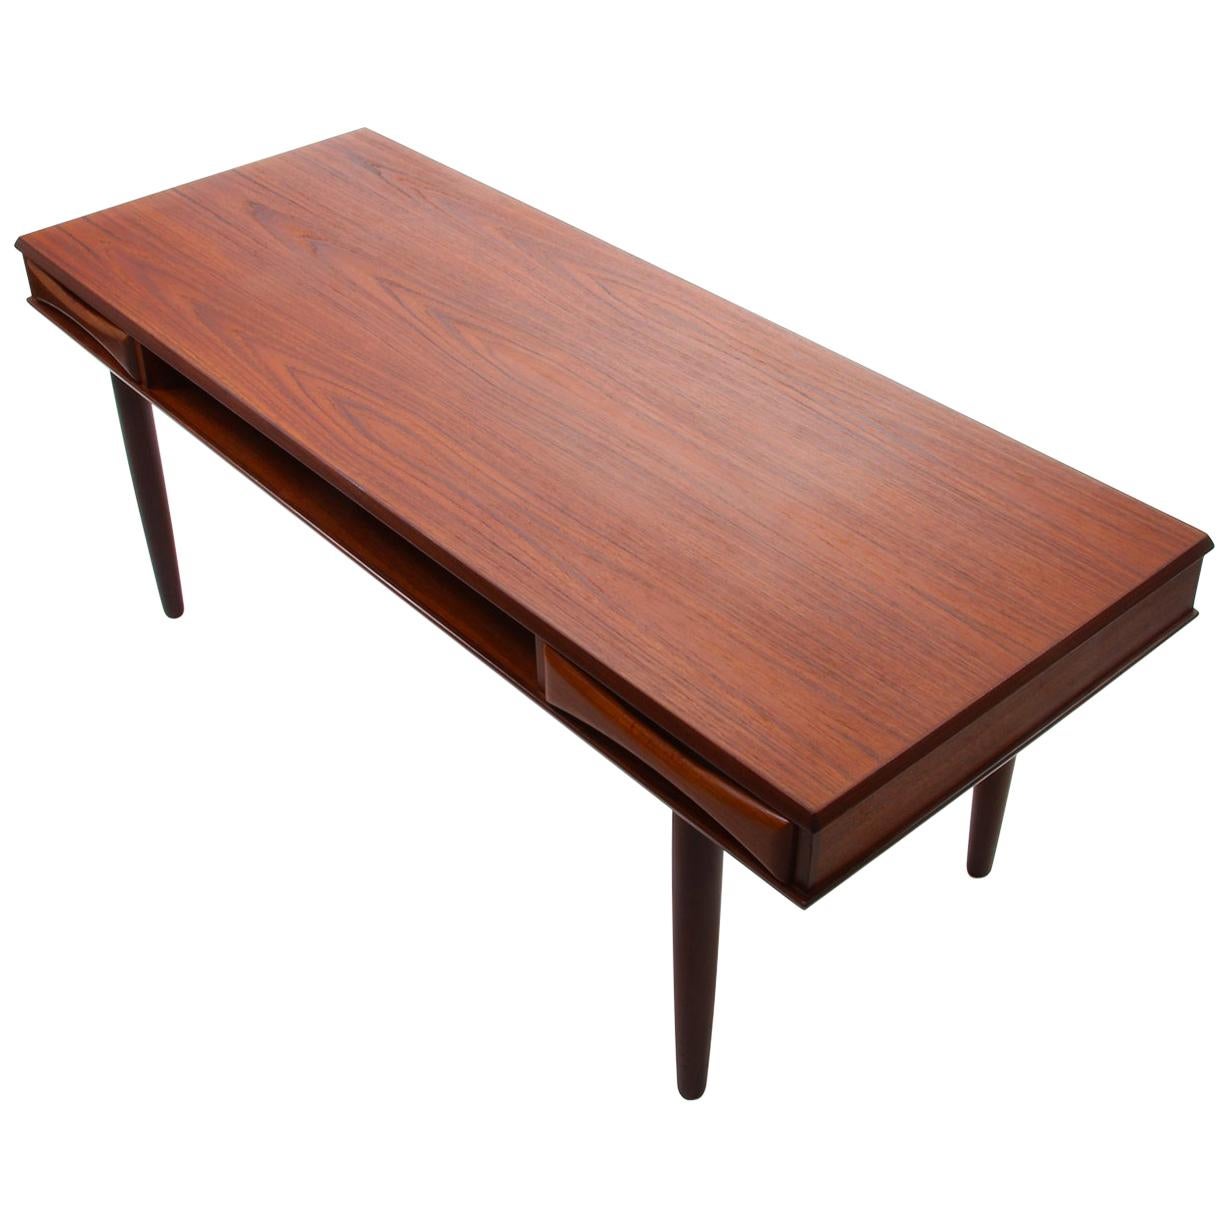 Teak Coffee Table by Danish Furniture Maker, 1960s, with Shelf and Two Drawers